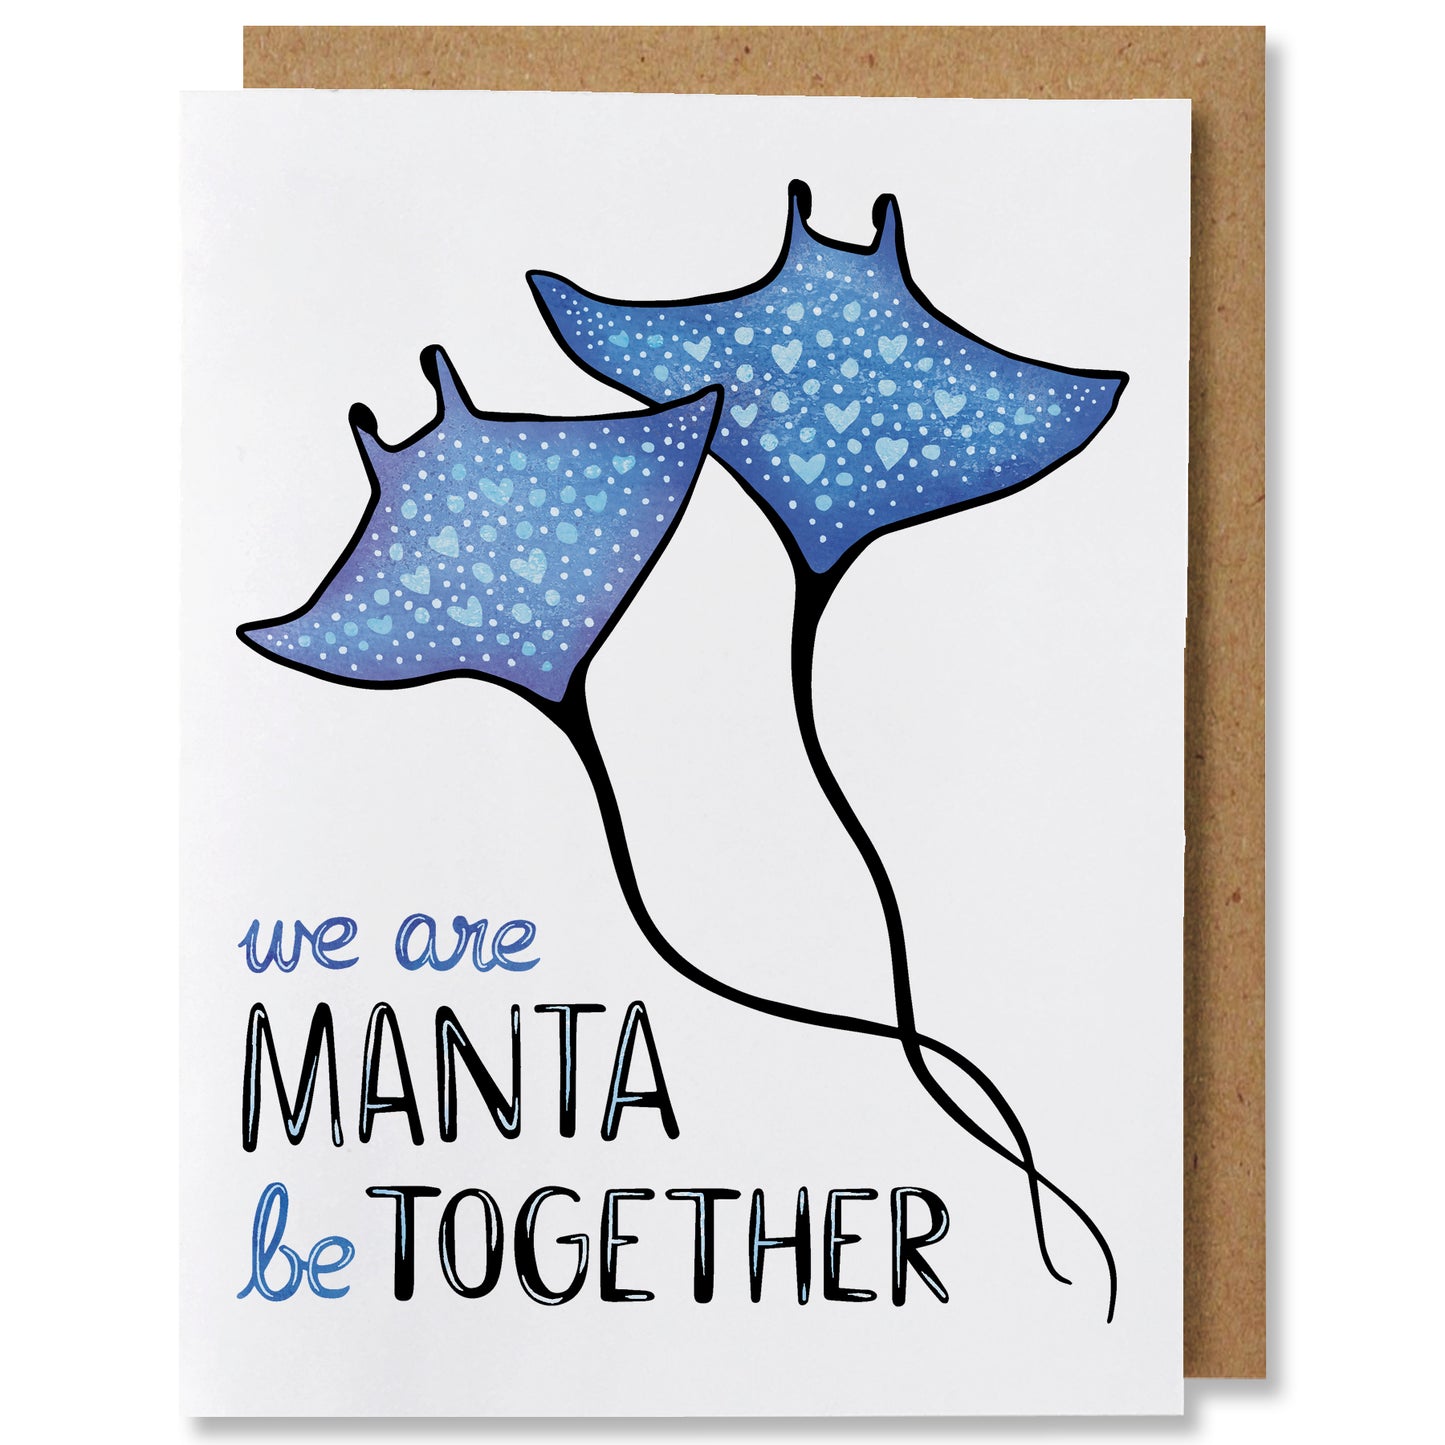 An illustrated greeting card featuring two blue manta rays with heart spots with the caption "we are manta be together"